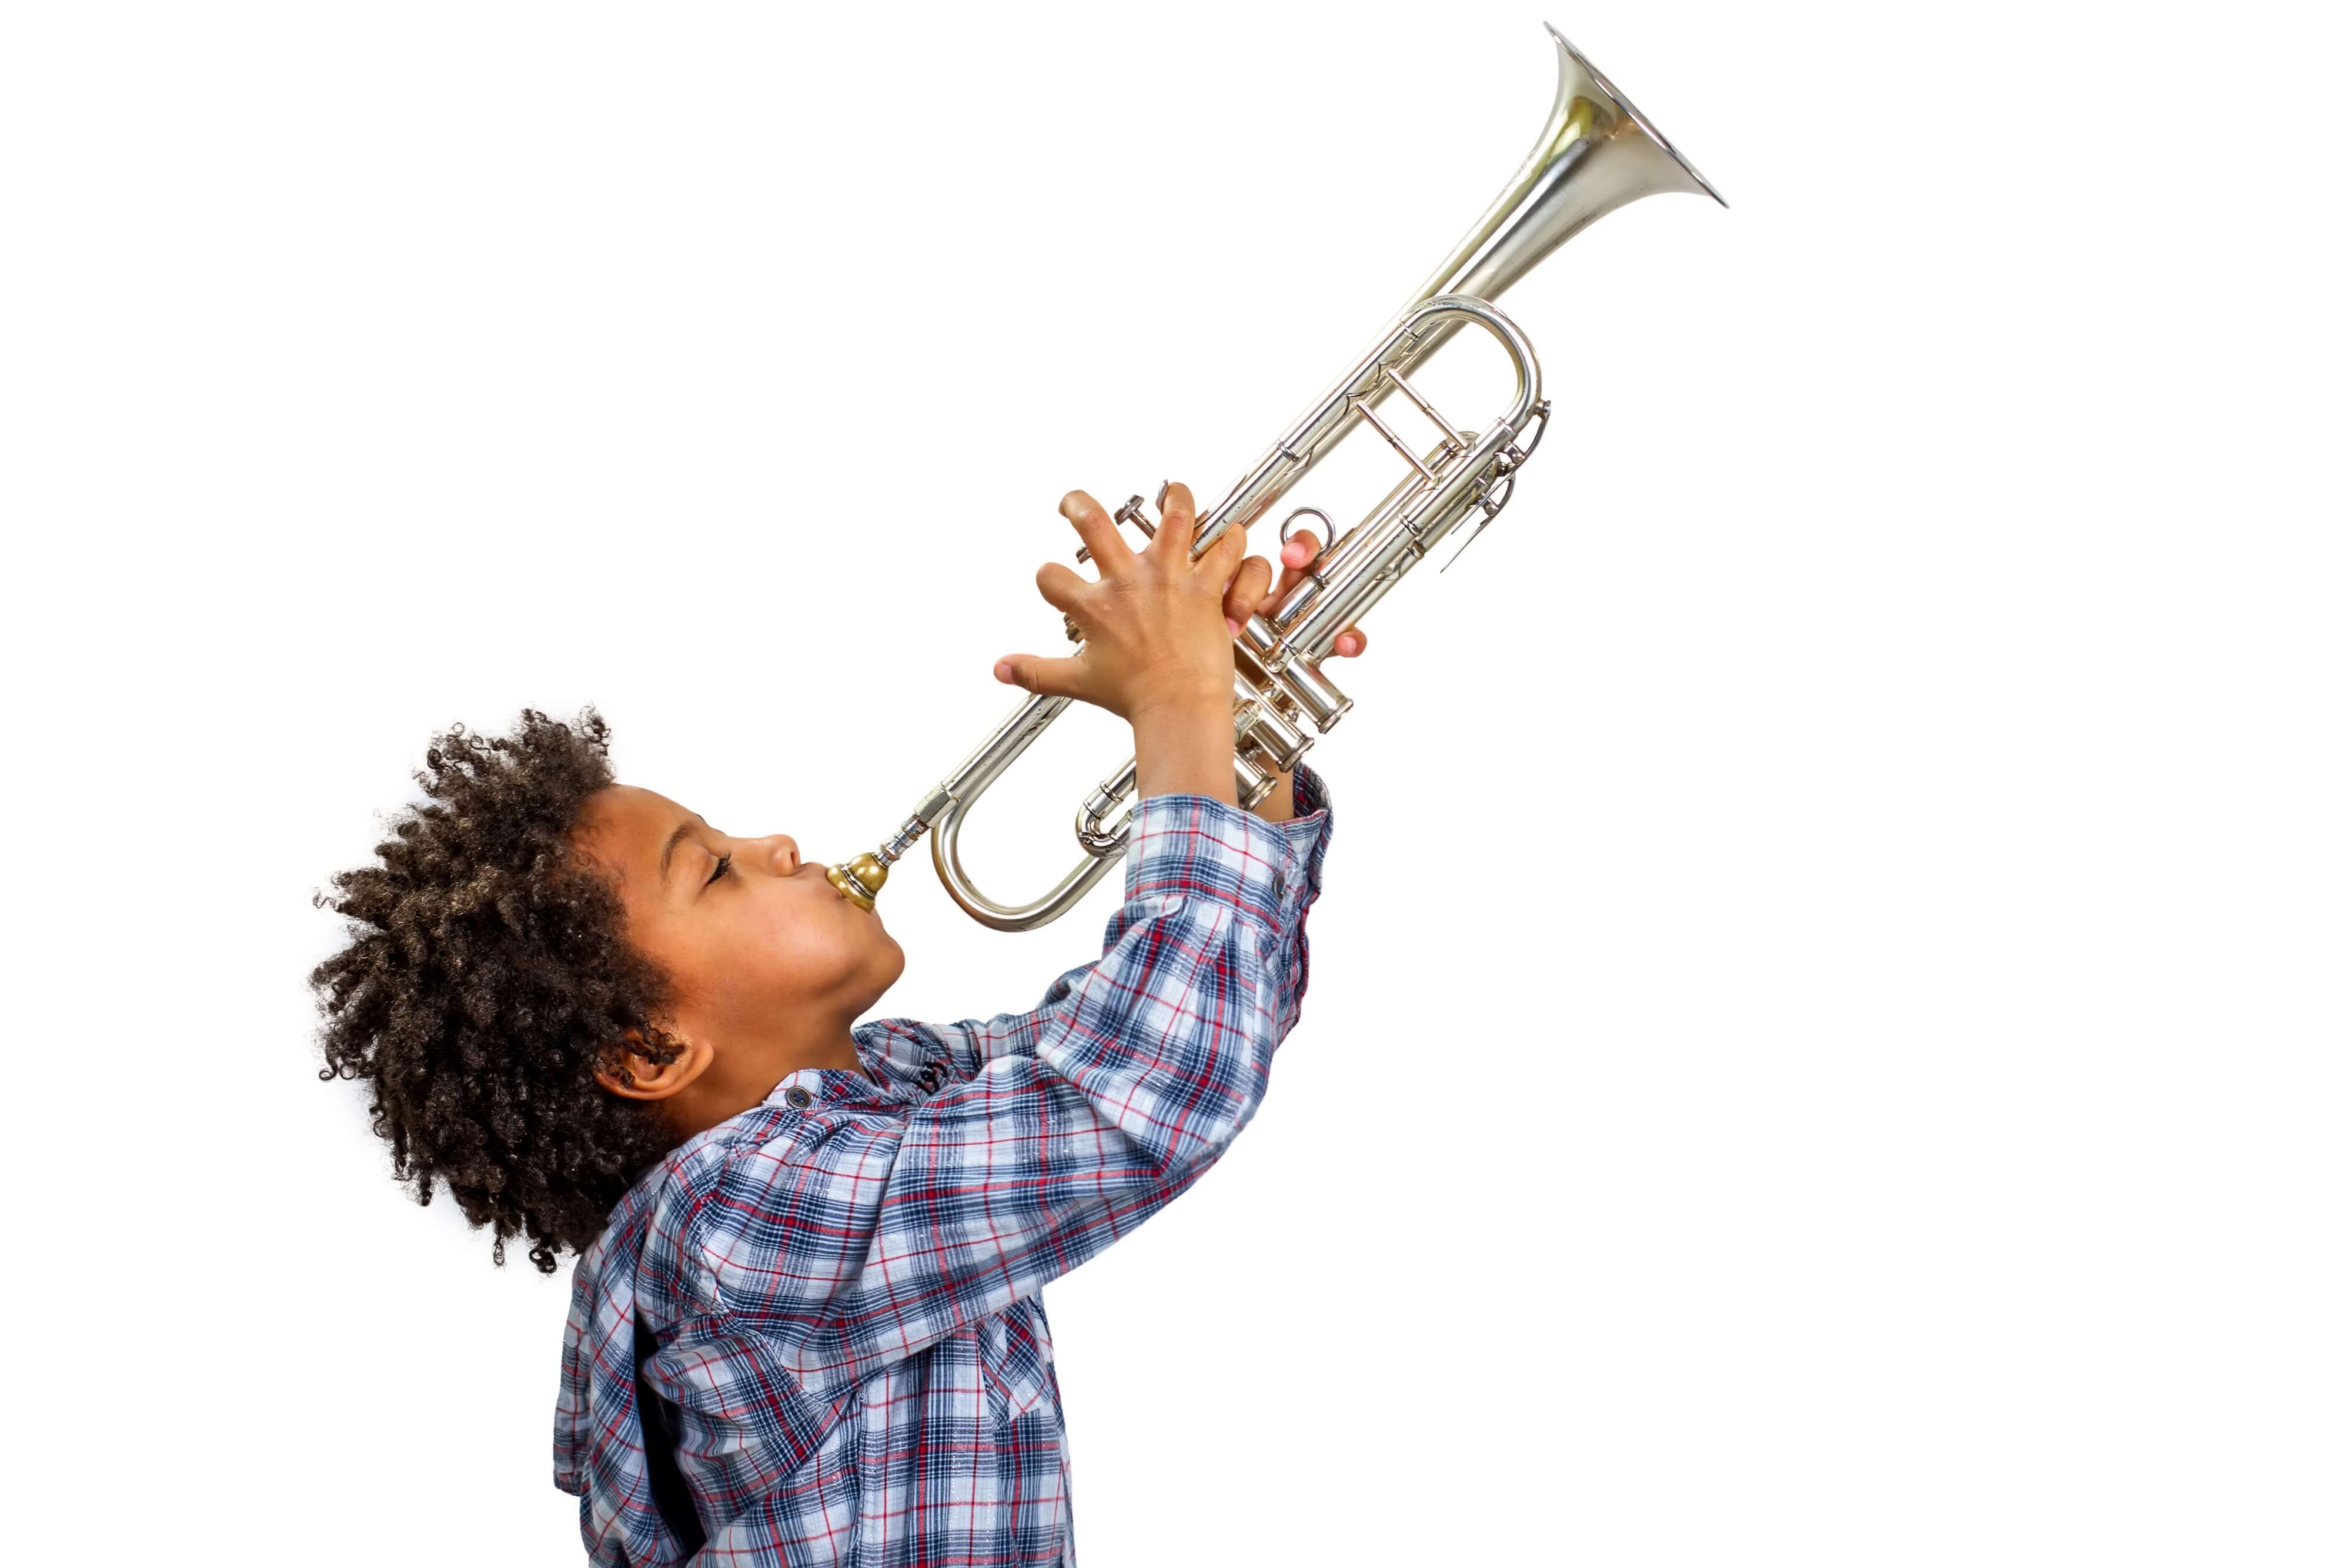 A boy plays the trumpet with a lot of energy.